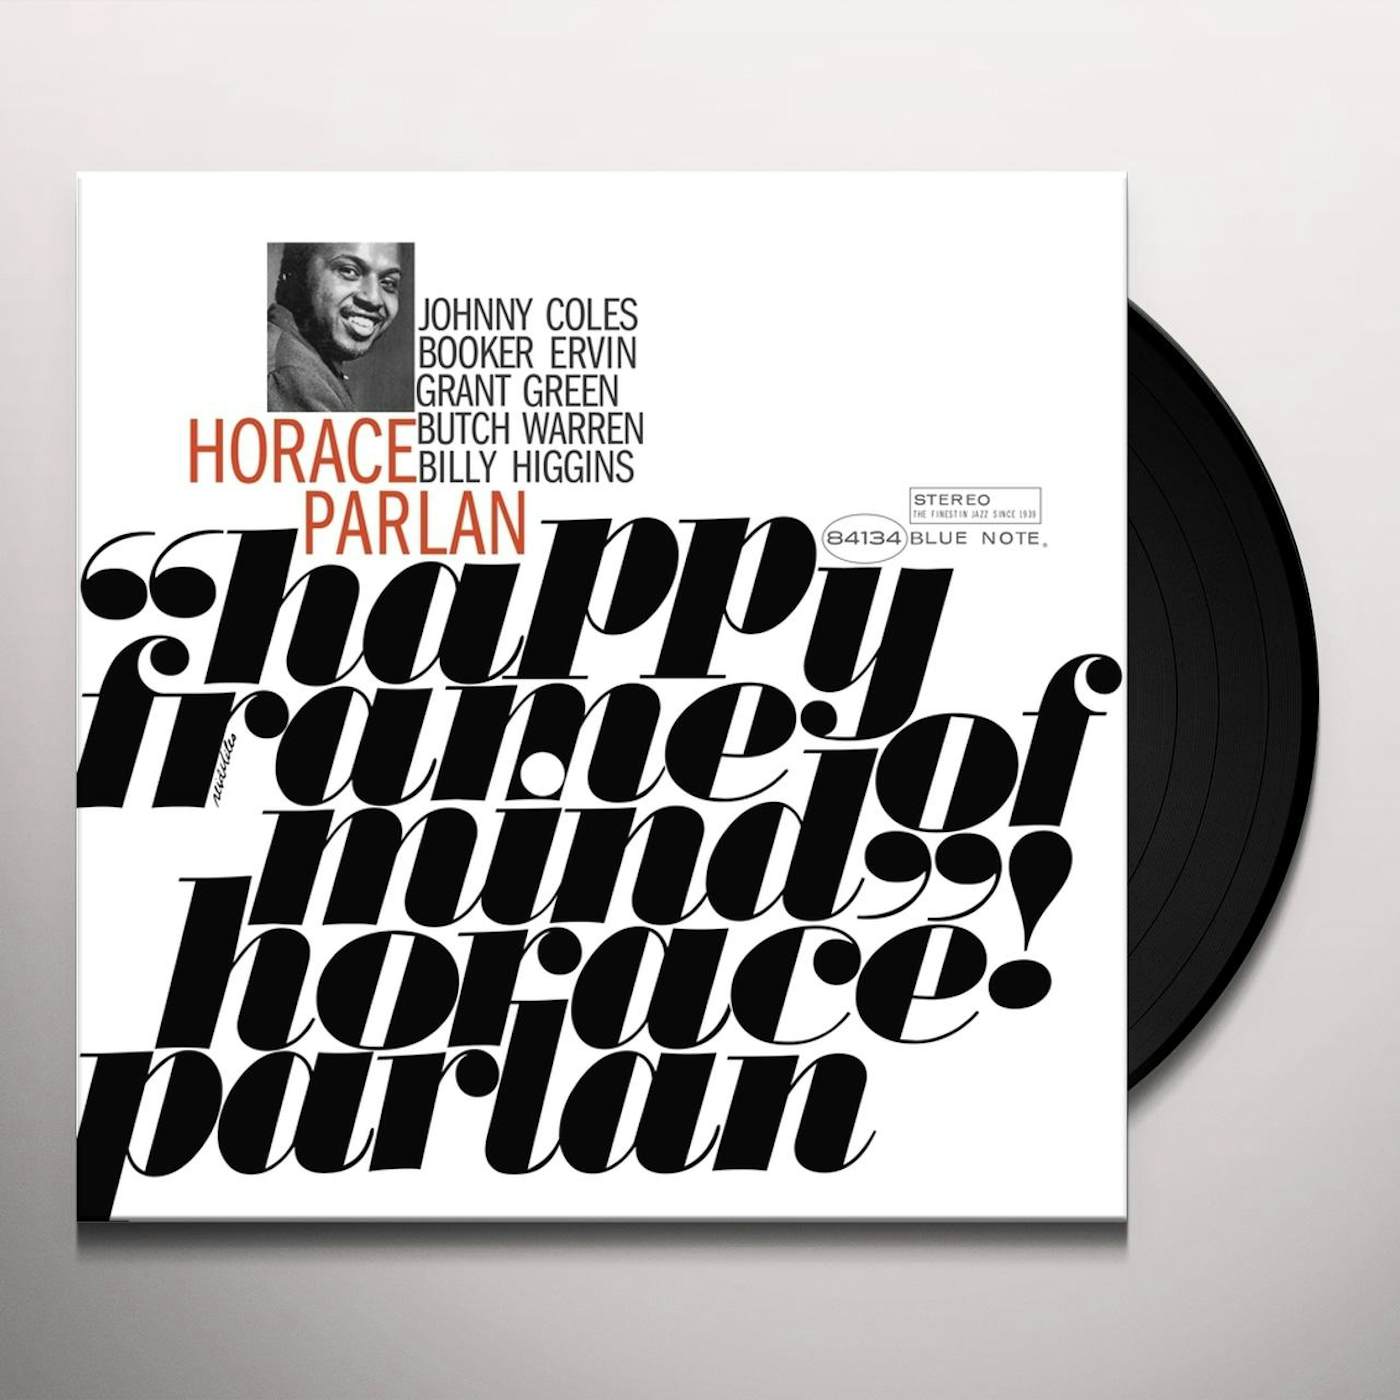 Horace Parlan Happy Frame of Mind Vinyl Record